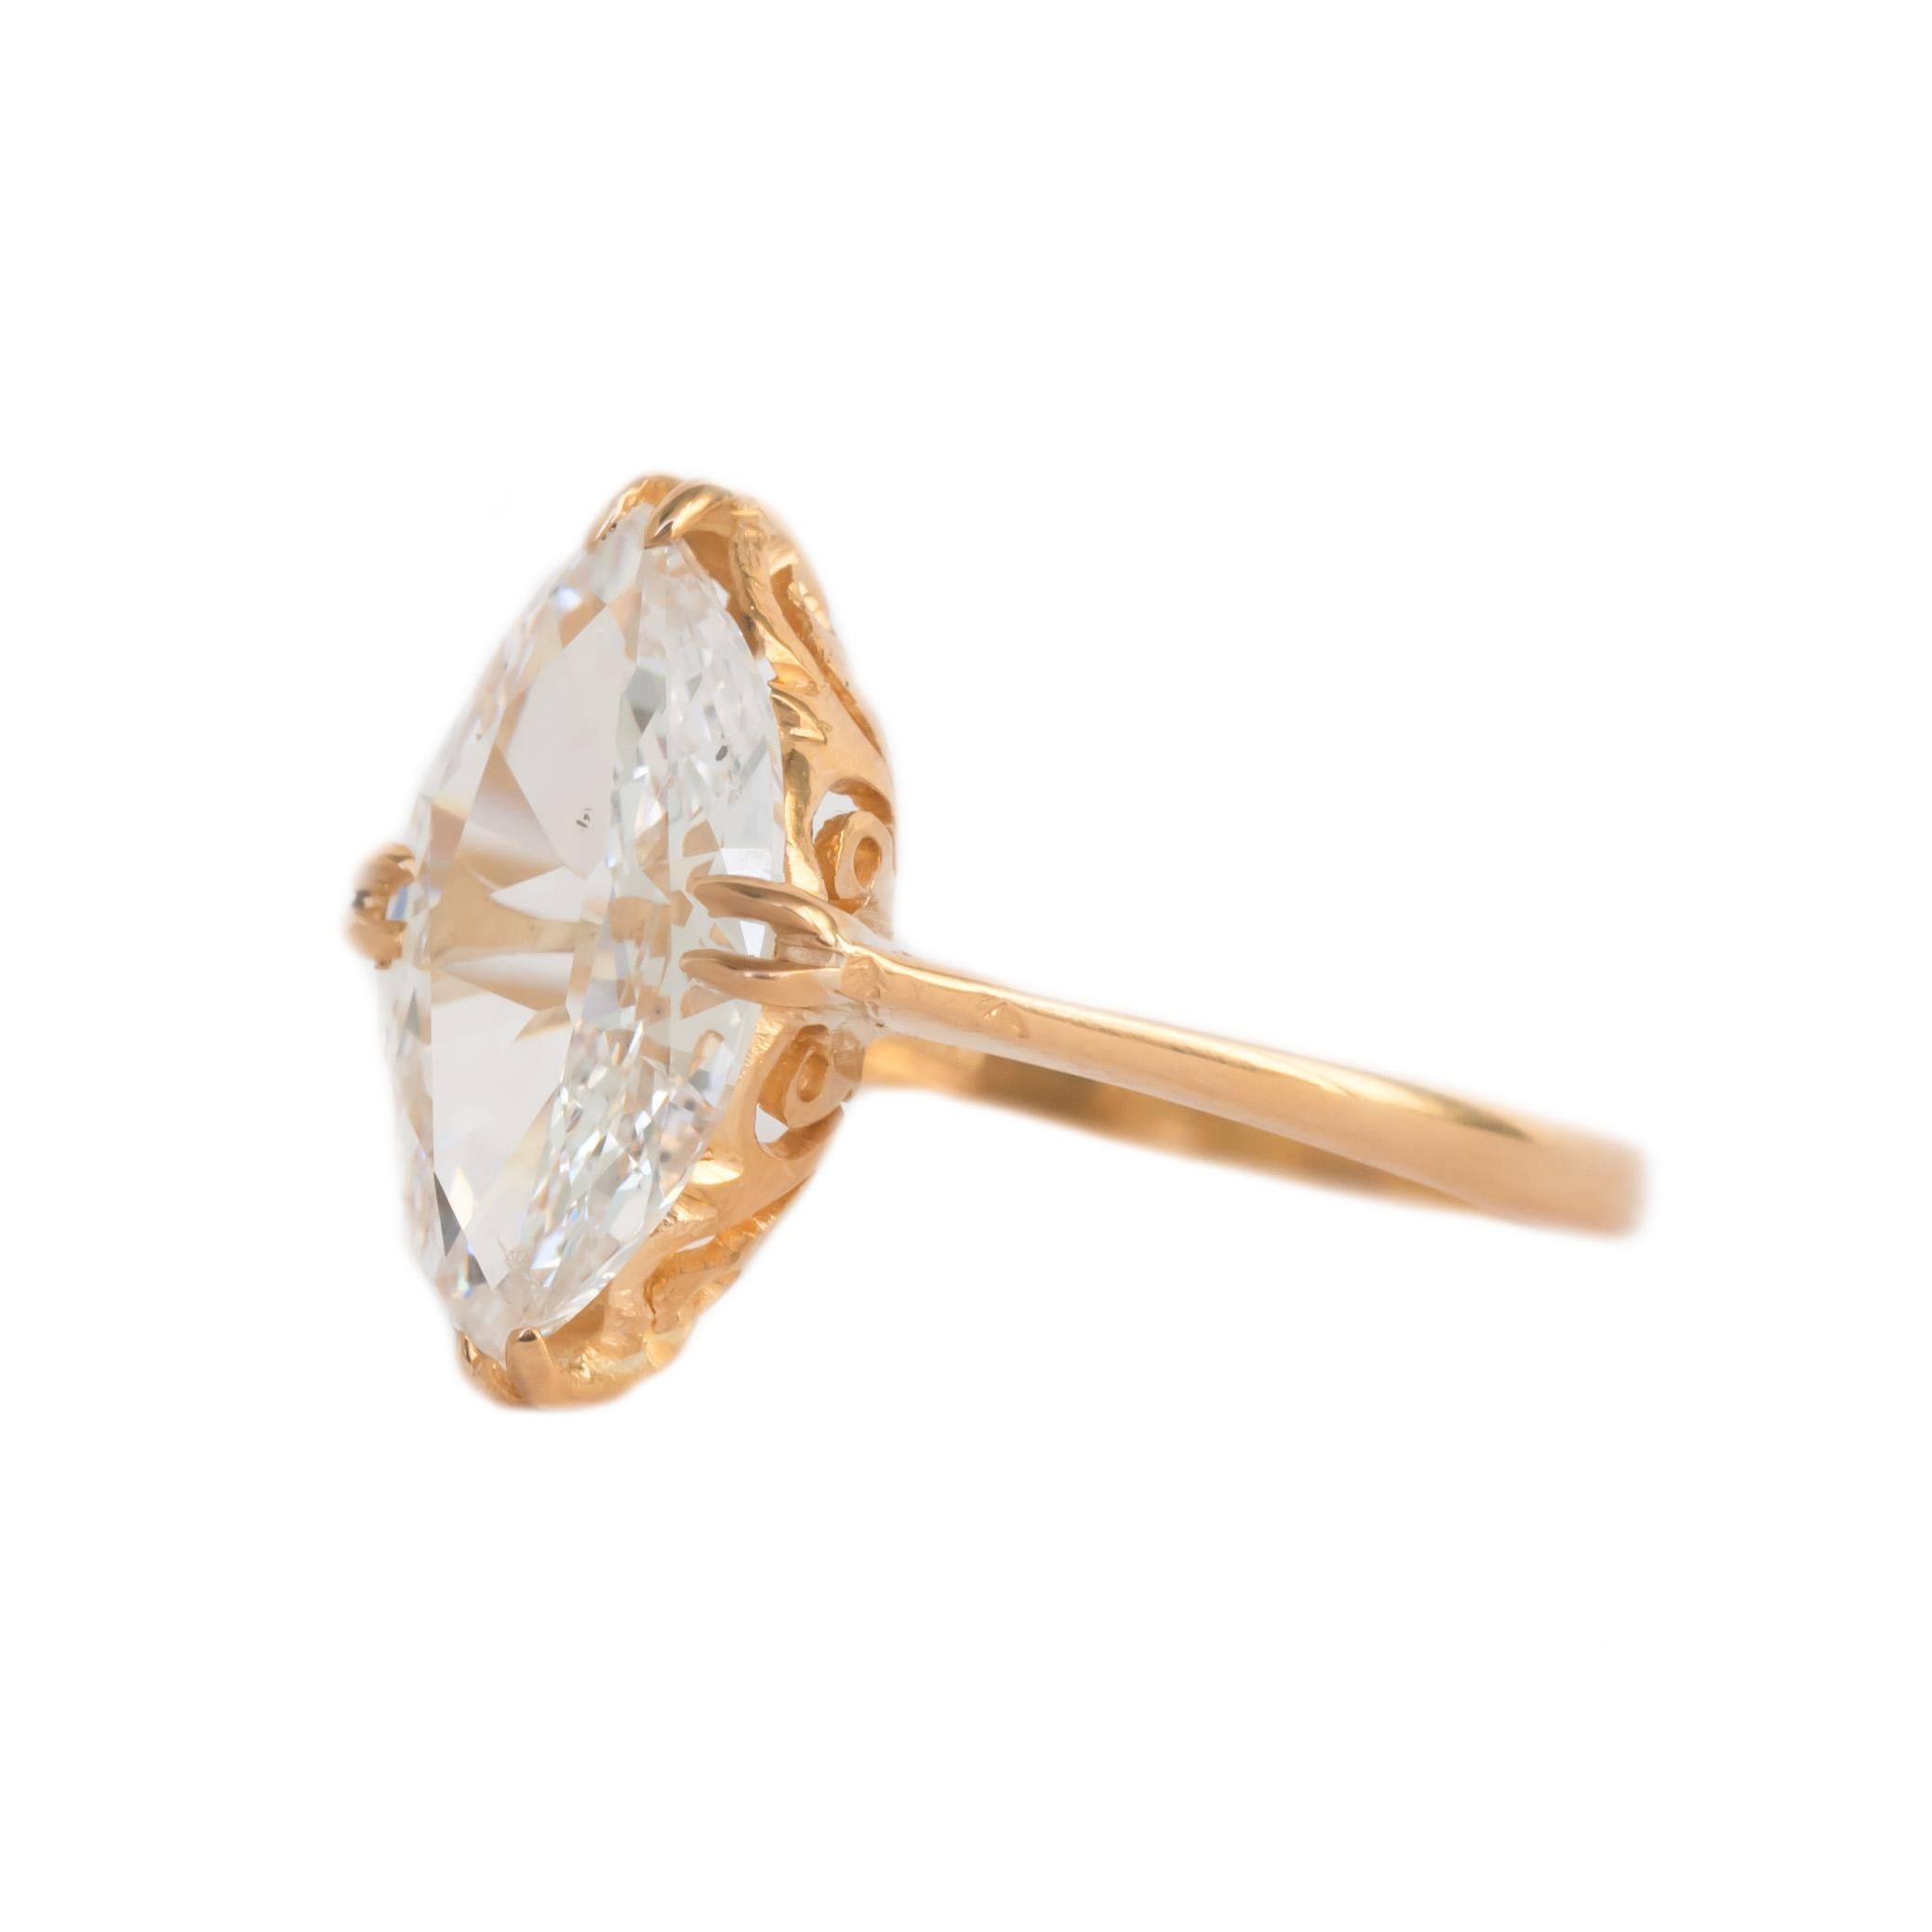 Ring Size: 5.50
Metal Type: 22 karat Yellow Gold  [Hallmarked, and Tested]
Weight: 2.4  grams

Center Diamond Details:
GIA REPORT #1206810951
Weight: 1.66 carat 
Cut: Antique Marquise
Color: E
Clarity: SI2

Finger to Top of Stone Measurement: